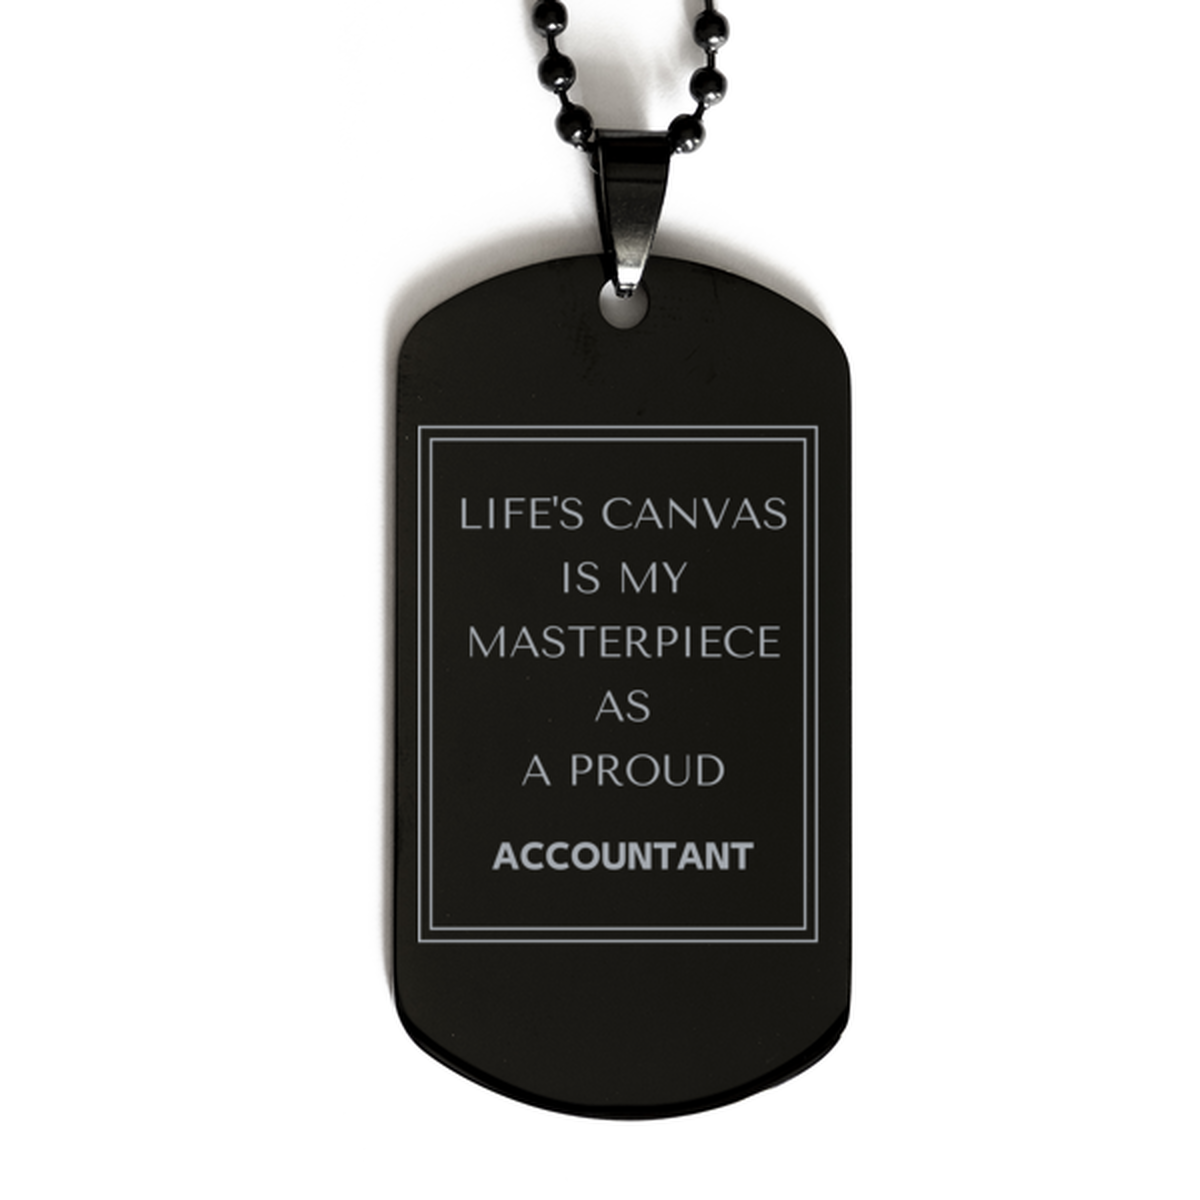 Proud Accountant Gifts, Life's canvas is my masterpiece, Epic Birthday Christmas Unique Black Dog Tag For Accountant, Coworkers, Men, Women, Friends